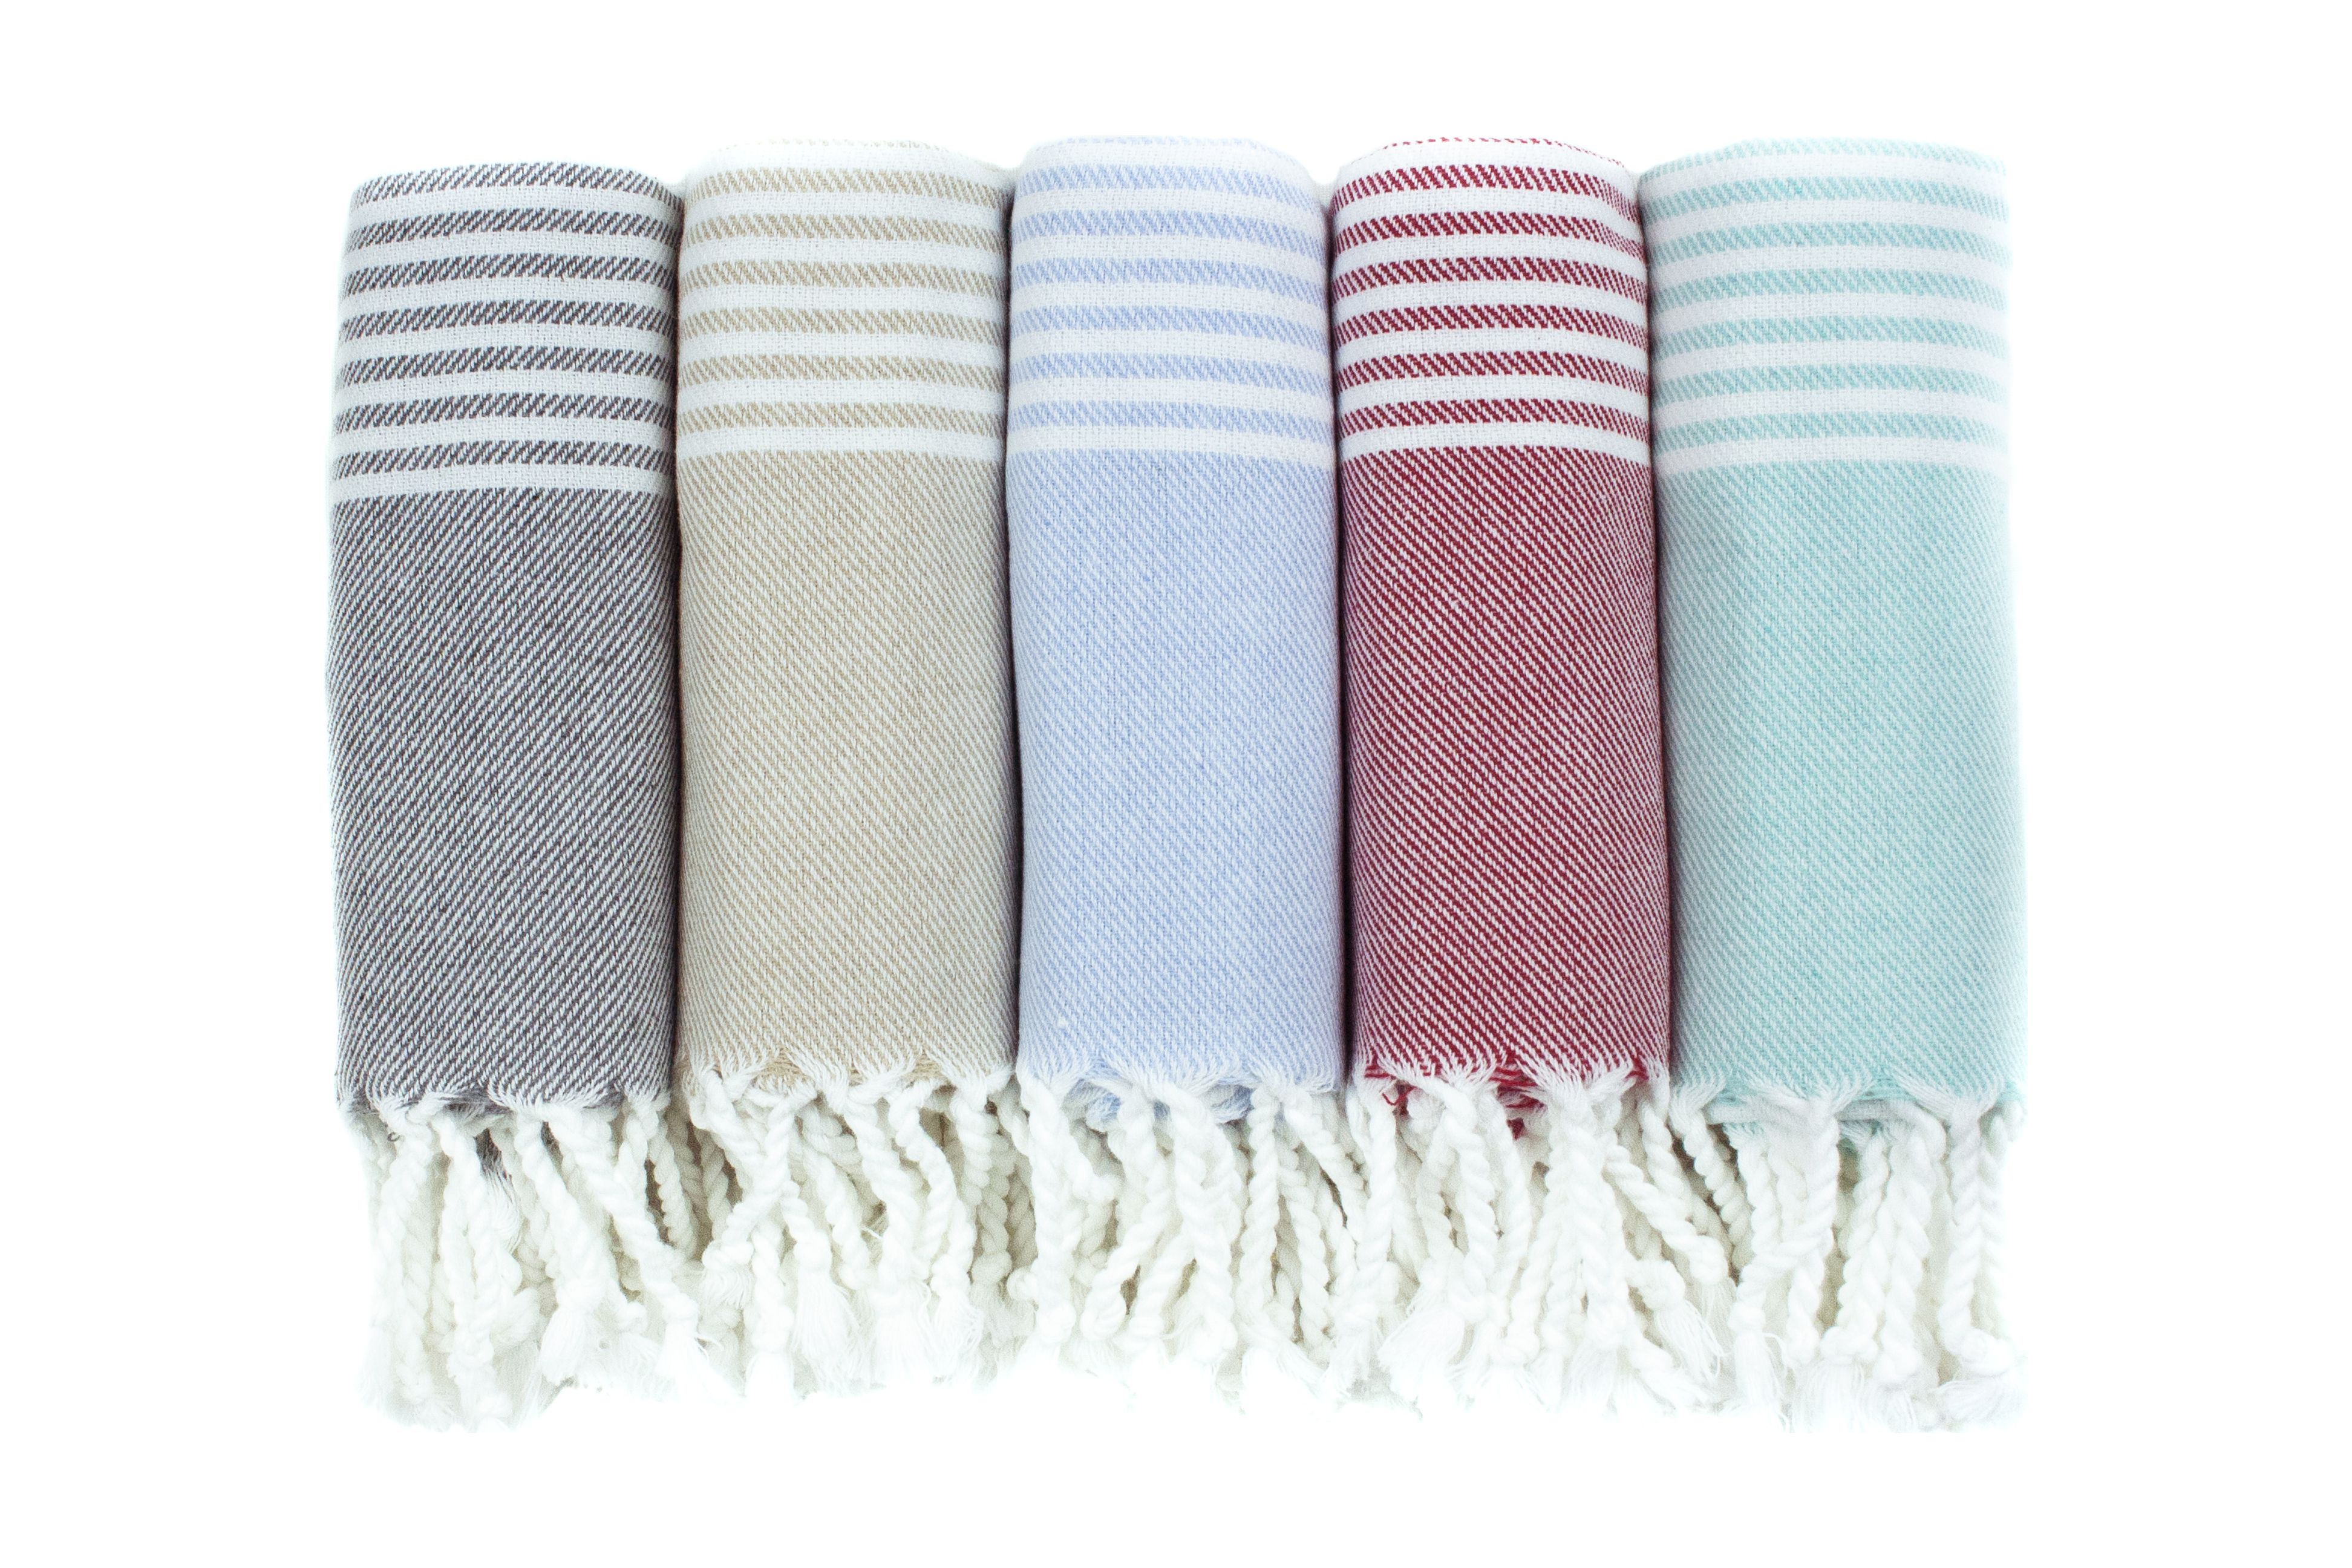 Turkish Hand Towels for Bathroom and Kitchen, 18 x 38 Inches, (Set of 3), Beige - image 4 of 6